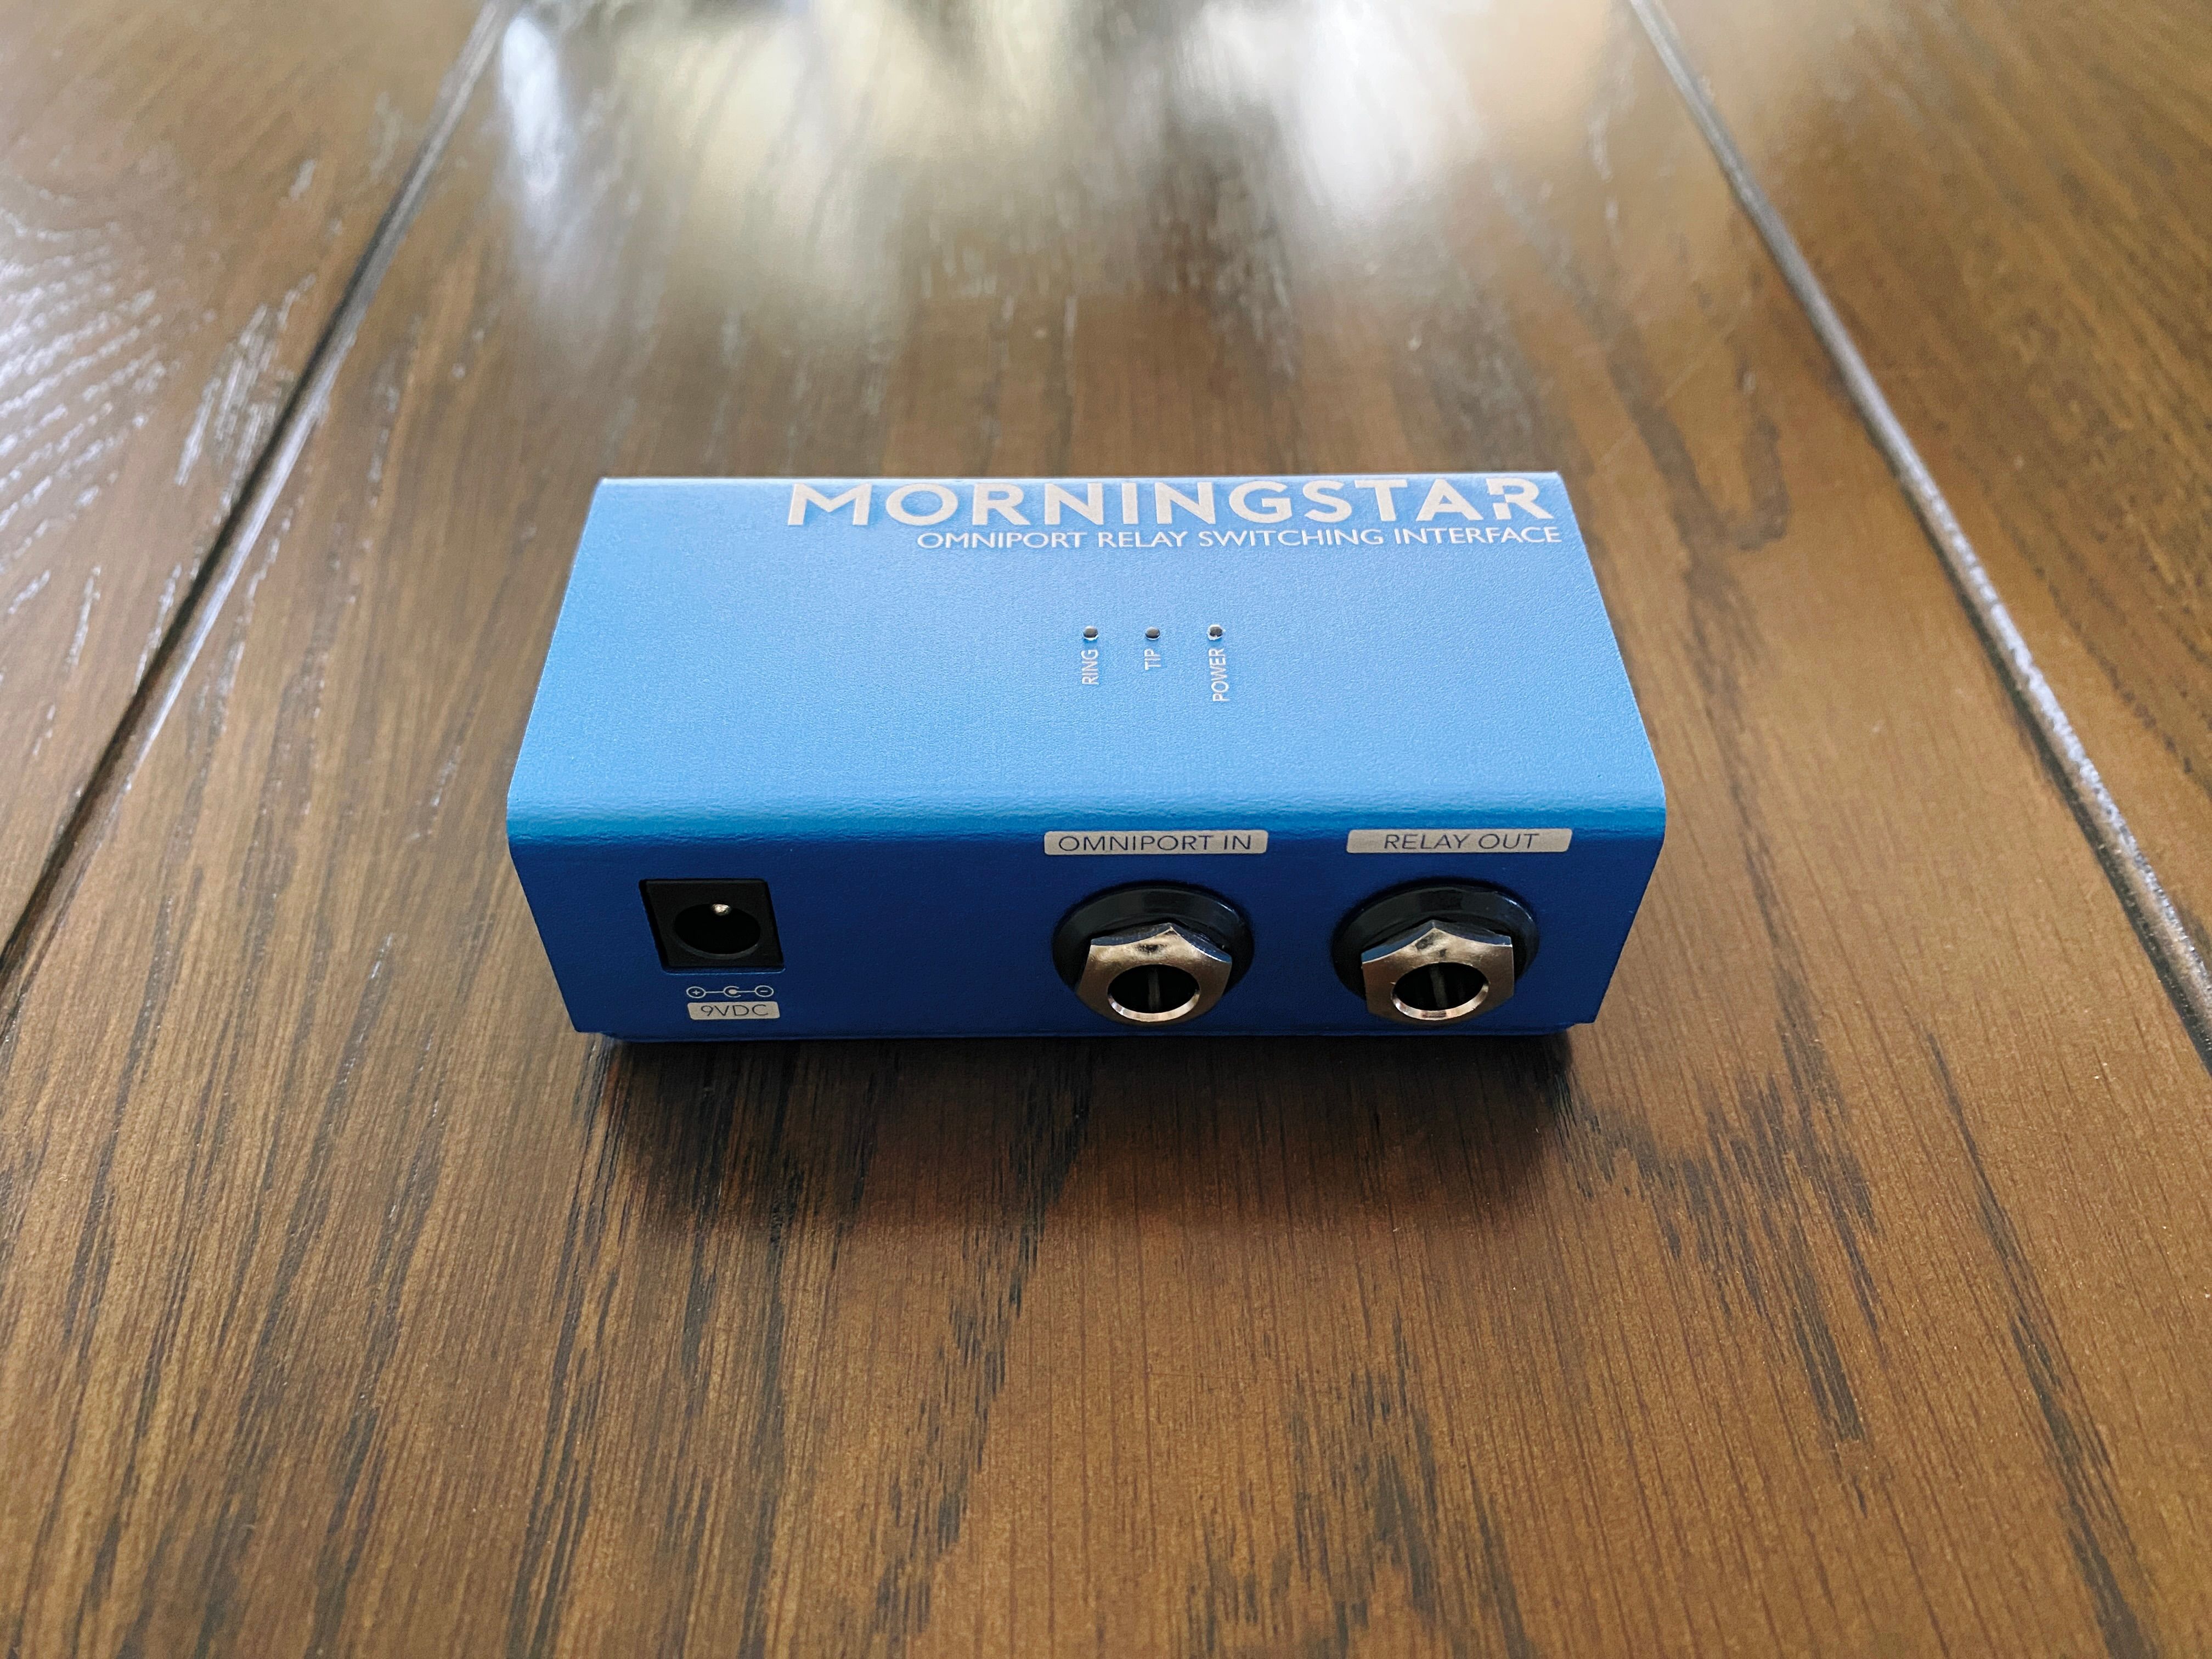 A photo of my Morningstar relay switching interface. It's a small blue metallic box with two TRS jacks and a DC in jack on the front, and three LEDs on the top marked "RING", "TIP", and "POWER".